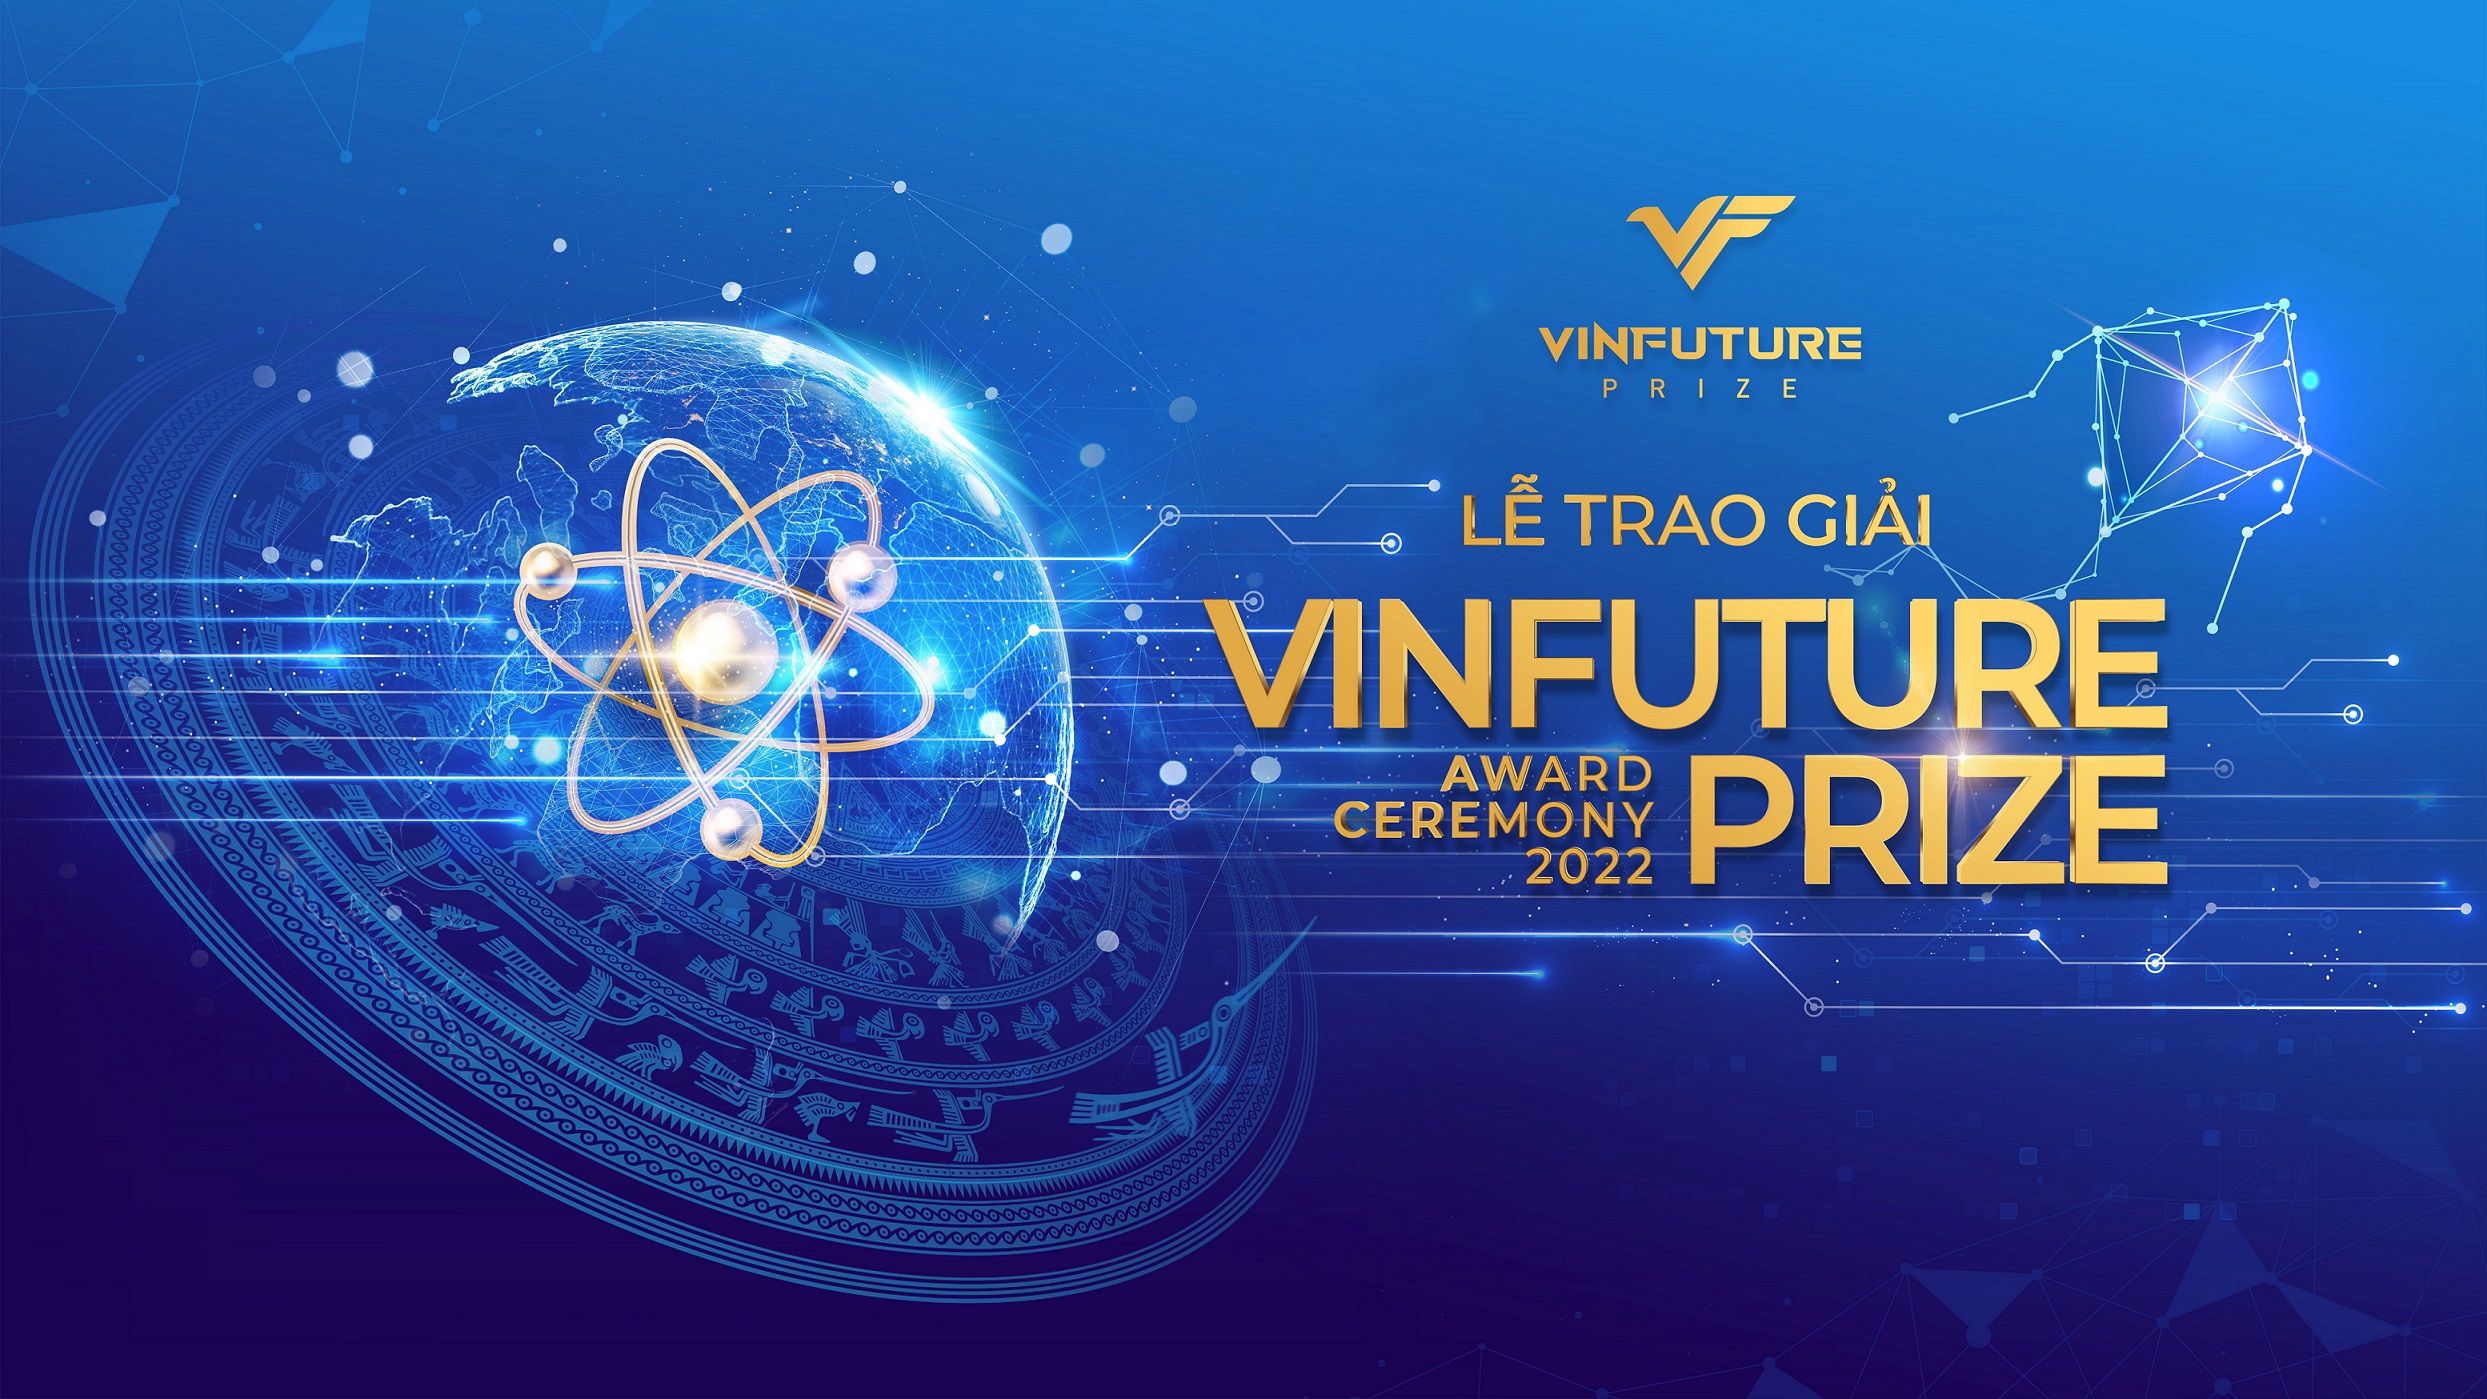 The VinFuture Prize Award Ceremony 2022 - Honoring innovations for global revival and sustainable development